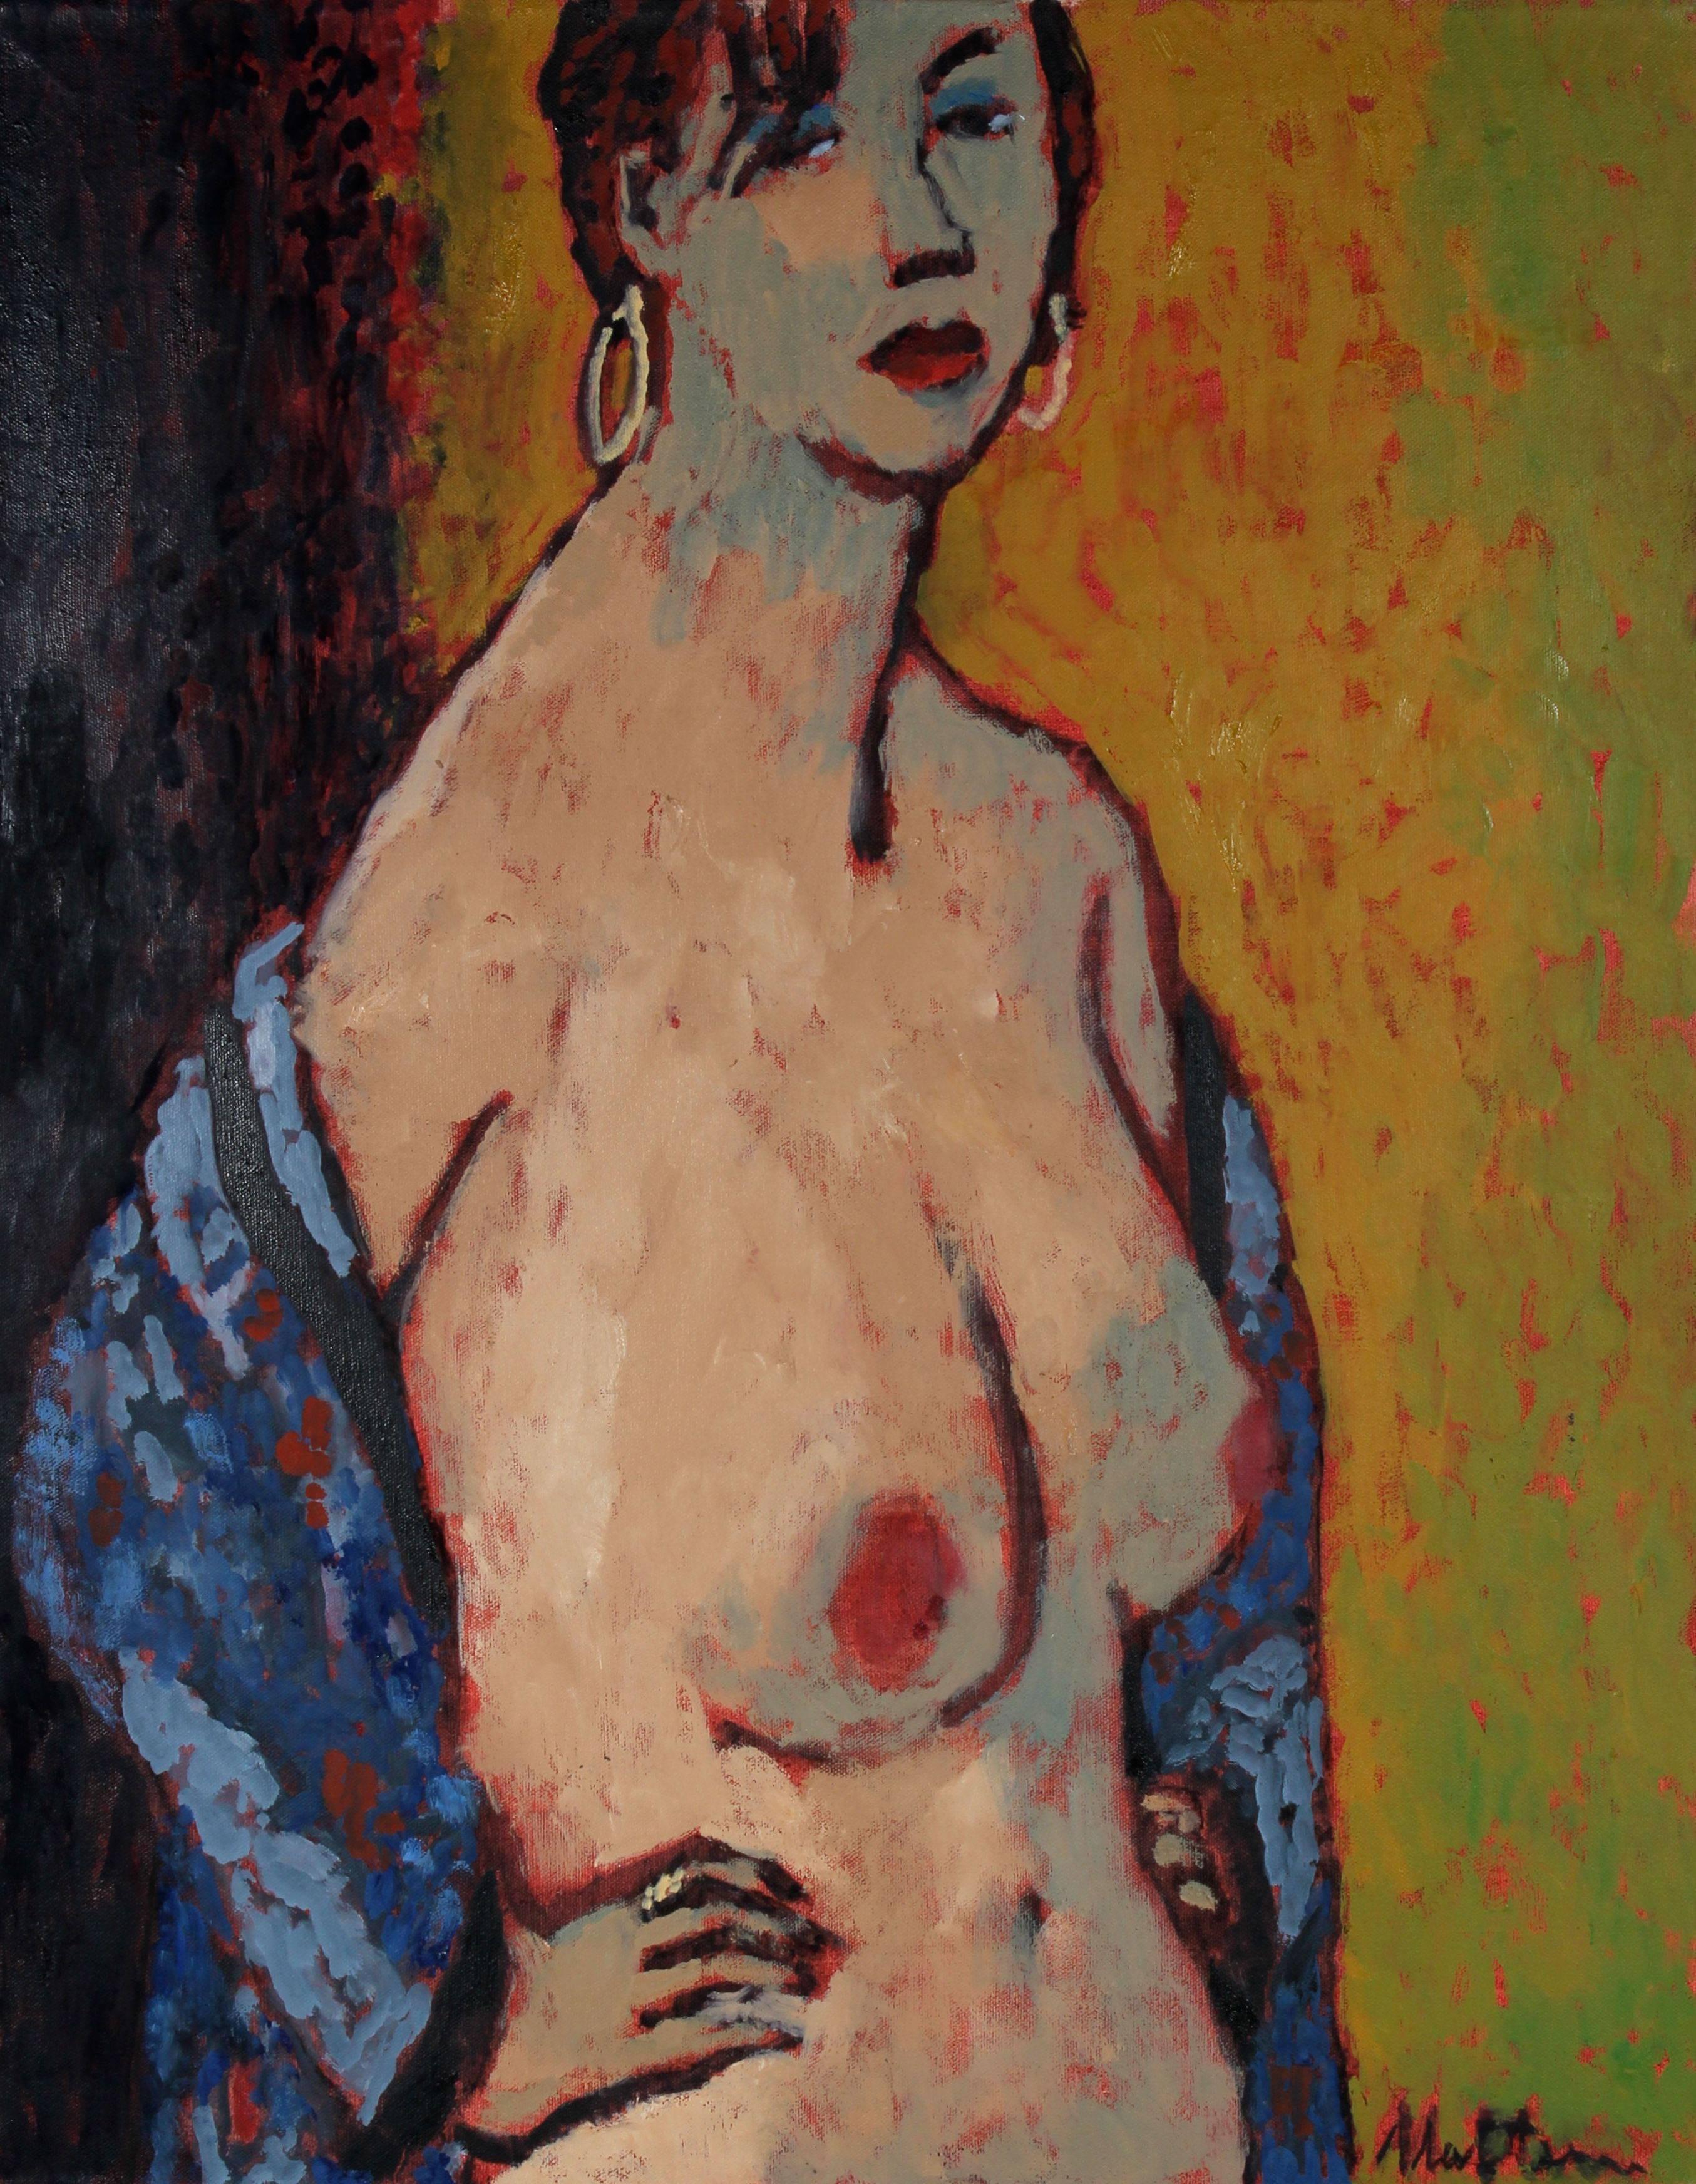 Rip Matteson Figurative Painting - Colorful Female Nude with Earrings Oil on Canvas with Green Mustard Yellow Blue